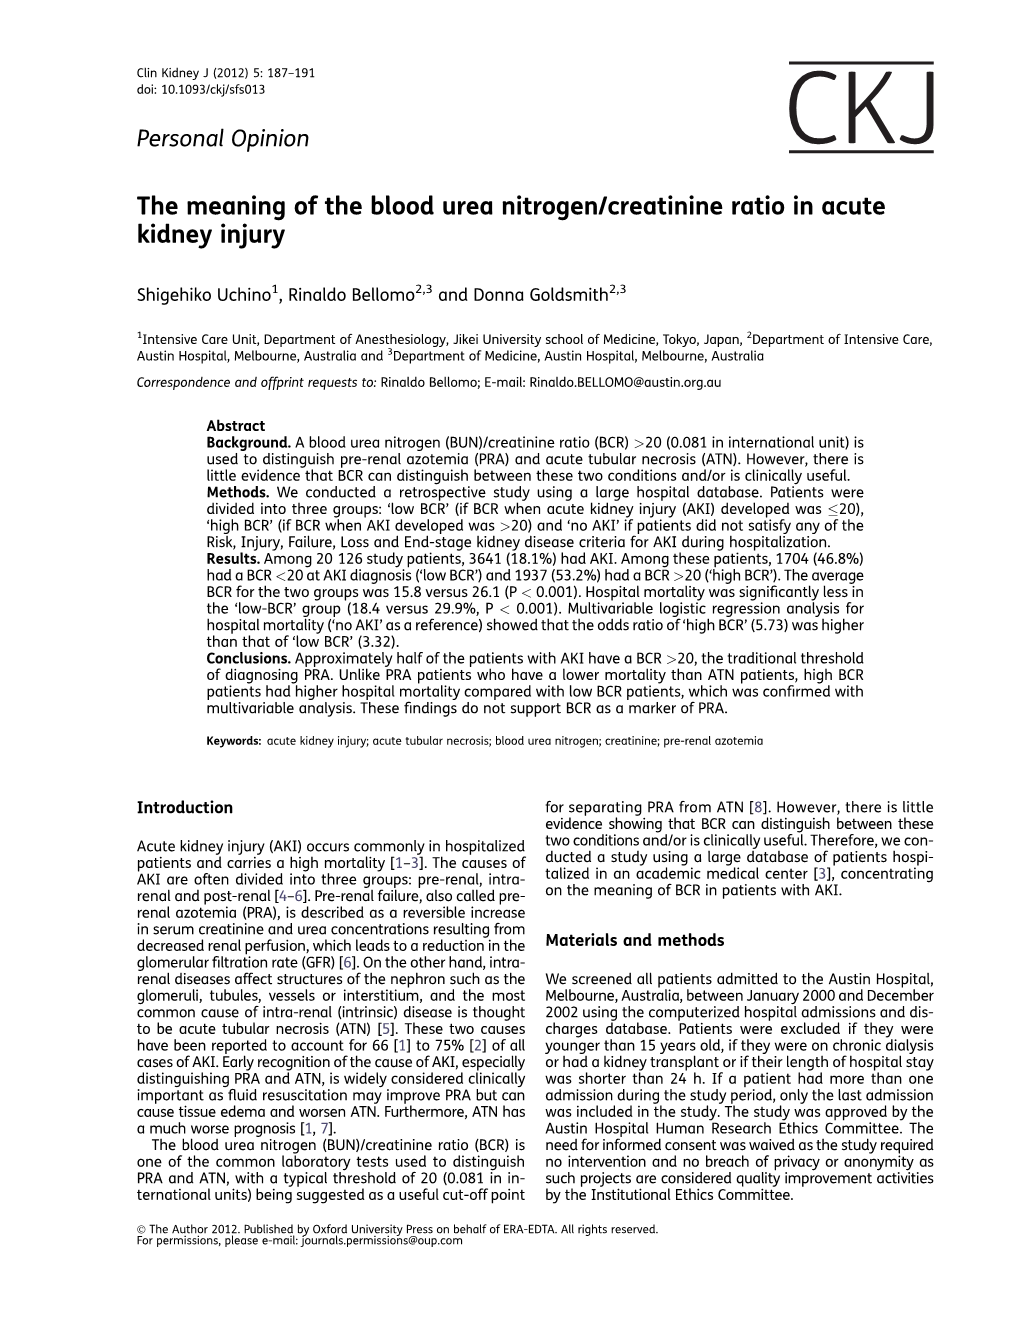 The Meaning of the Blood Urea Nitrogen/Creatinine Ratio in Acute Kidney Injury